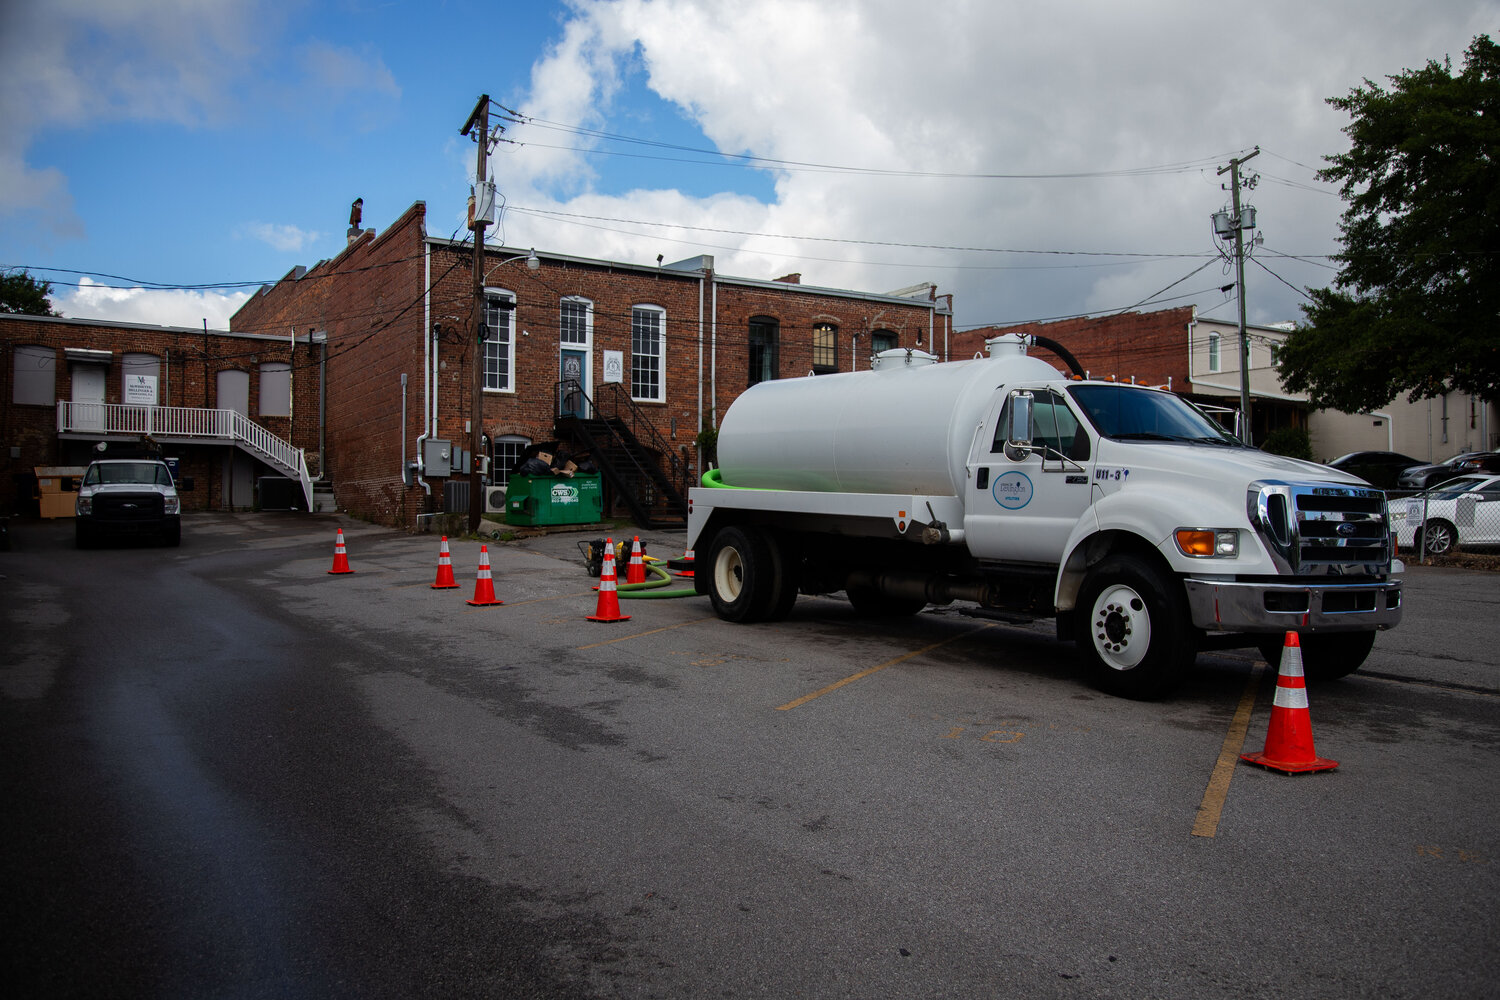 A sewage truck has been pumping 24/7 since March in downtown Lexington as the town works to get access to the property where it needs to fix a line.